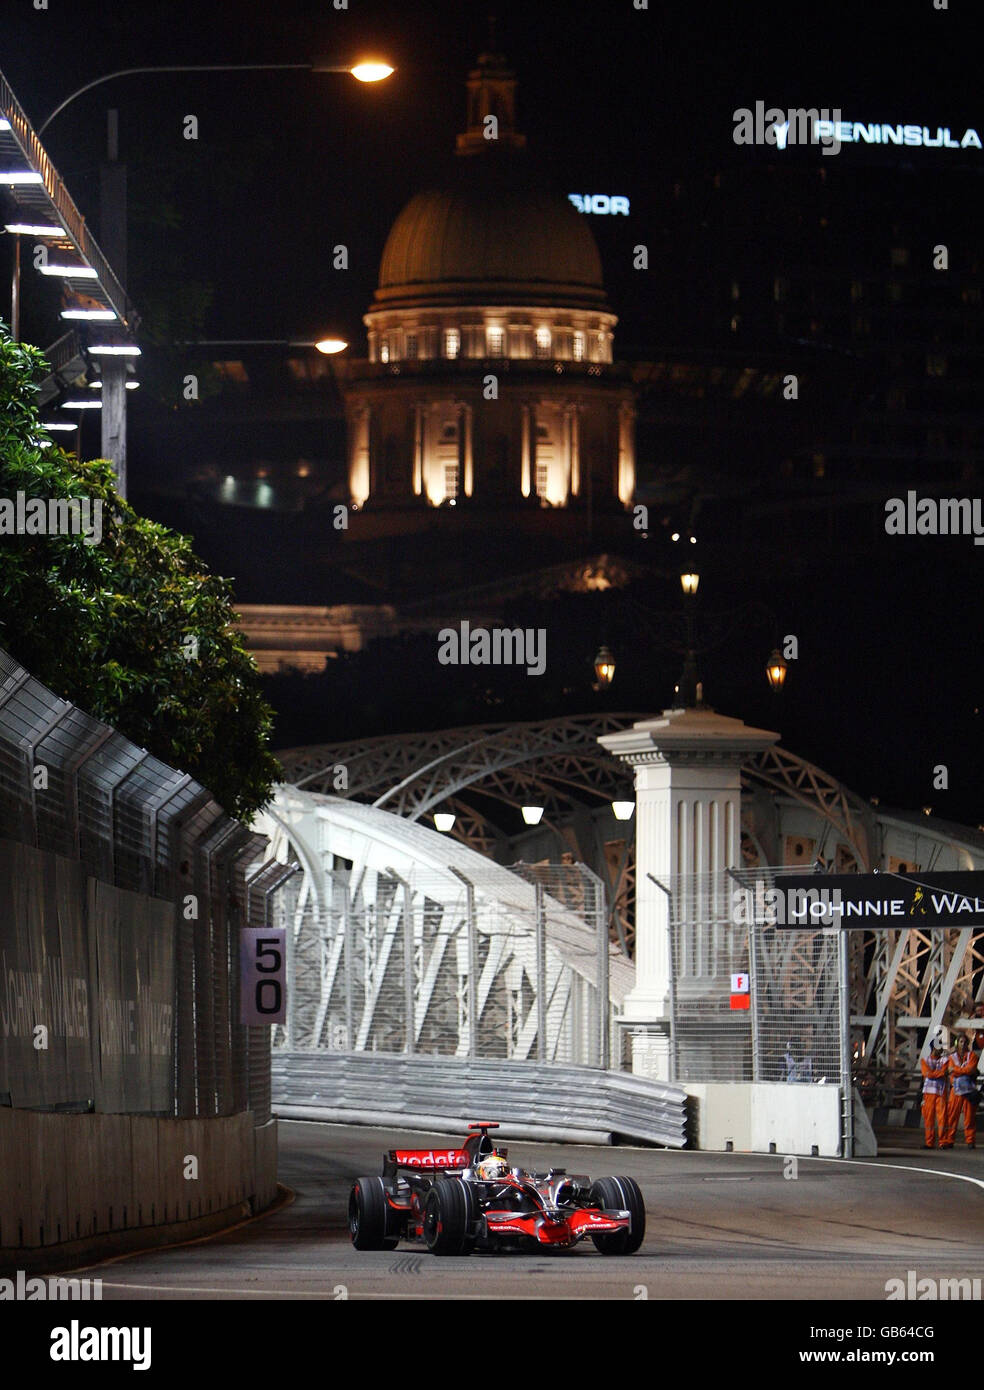 McLaren Mercedes' Lewis Hamilton drives over the Anderson Bridge during a practice session at the Marina Bay Circuit Park in Singapore. Stock Photo